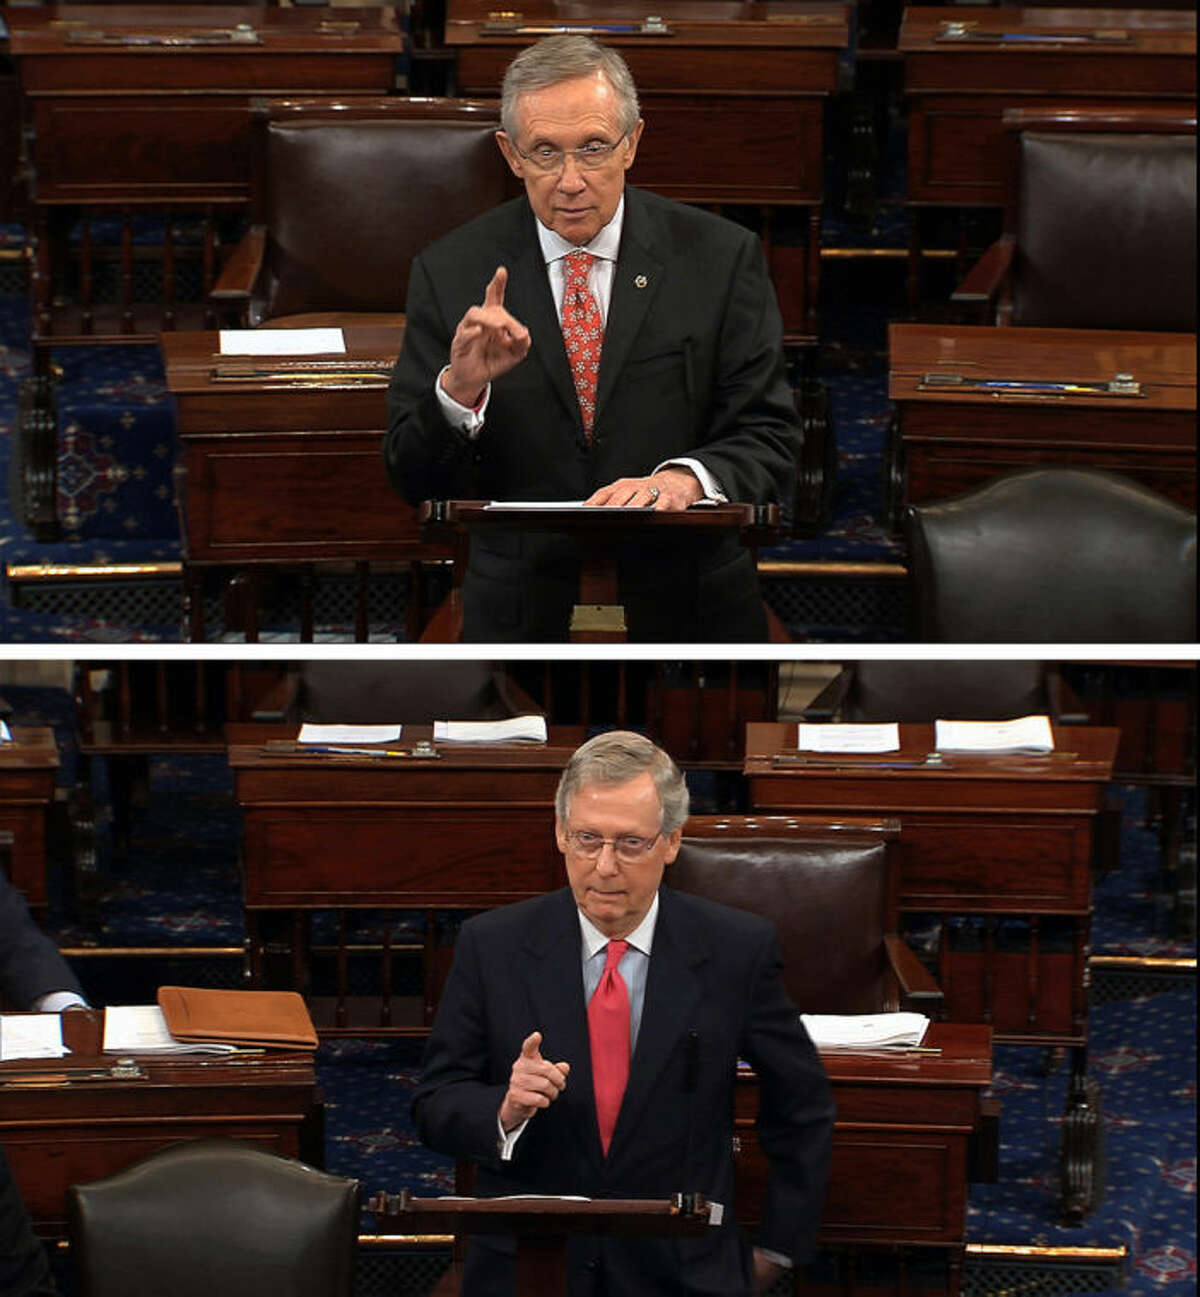 FILE - In this combination of July 11, 2013, file images from Senate Television Majority Leader Harry Reid, D-Nev., top, and Republican leader, Sen. Mitch McConnell, R-Ky., speak on the floor of the Senate on Capitol Hill in Washington. Democrats threatened to change Senate rules unilaterally if Republicans block yes-or-no votes on several of President Barack Obama?•s top-level nominees. Reid accused Republicans of trying to deny Obama the right to have his team in place, and accused McConnell of failing to live up to his commitments to allow votes on all nominees, except under extraordinary circumstances. Moments later, McConnell said Reid was misquoting him and at the same time failing to honor his word not to change the rules of the Senate unilaterally. (AP Photo/Senate TV, Files)